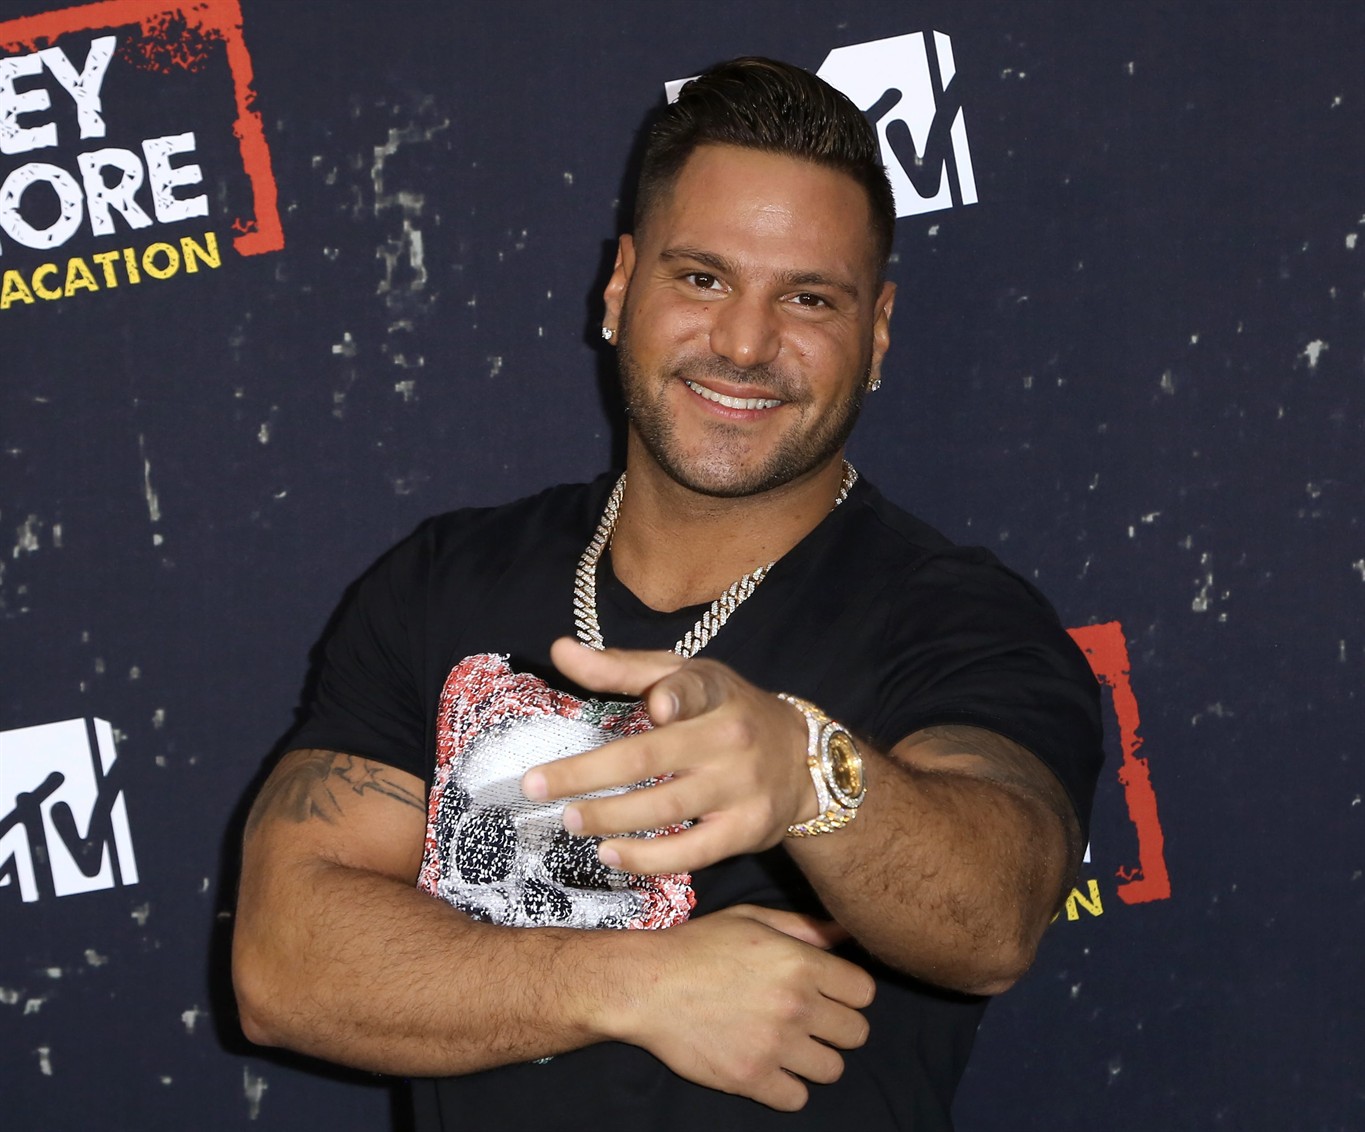 31-year-old ex-girlfriend of “Jersey Shore” TV show sta...